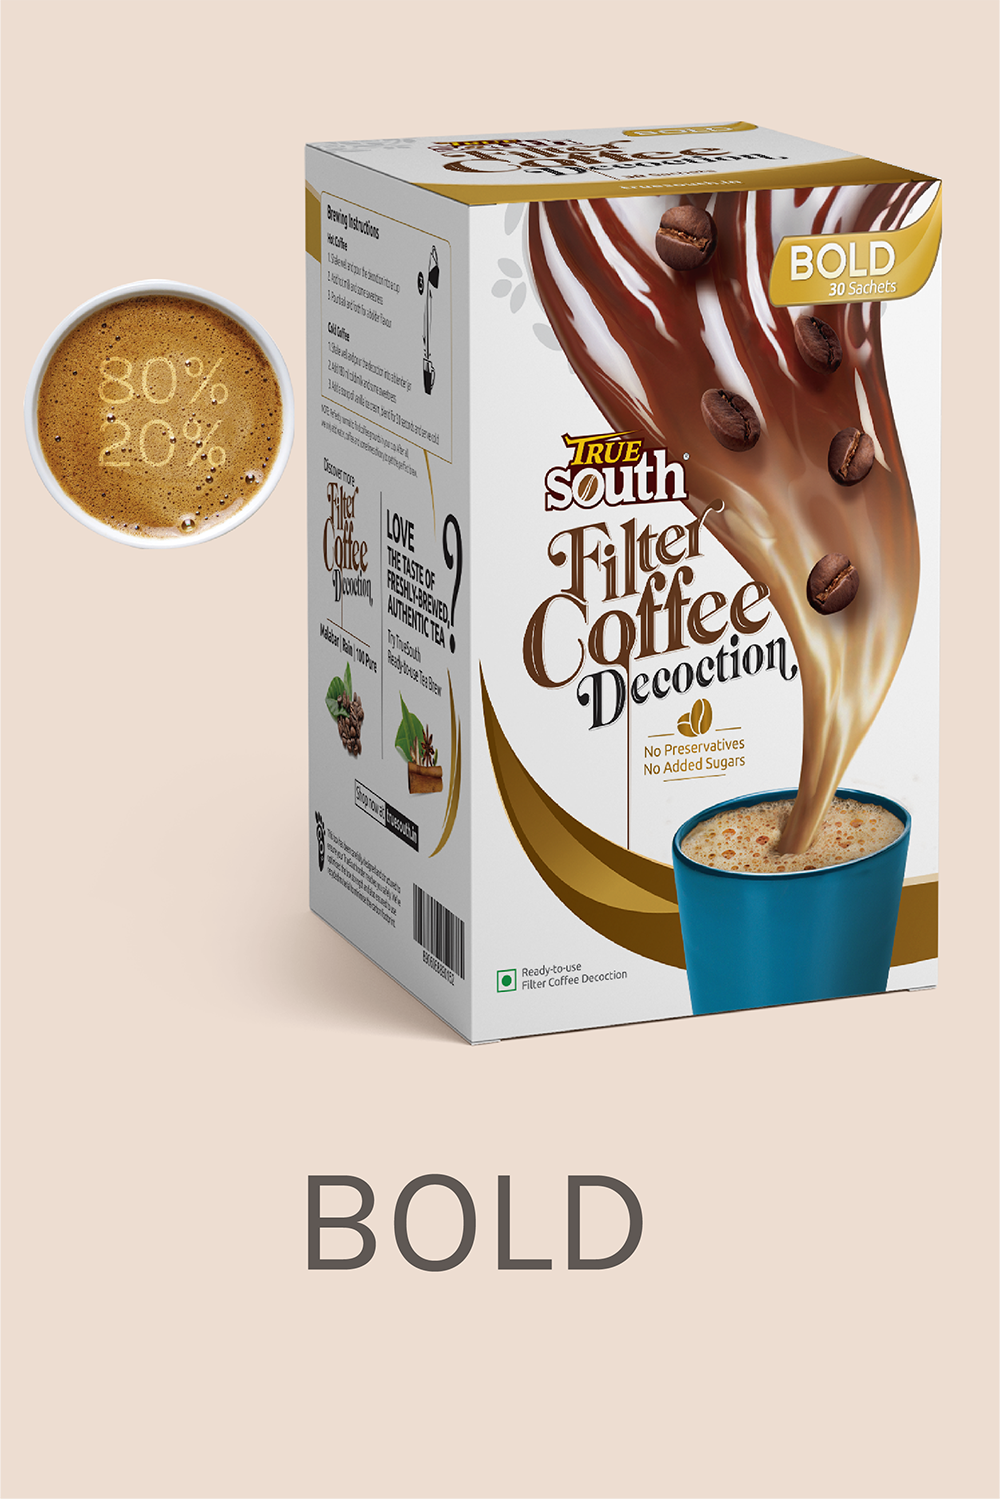 BOLD - Ready-to-use Filter Coffee Decoction Subscription